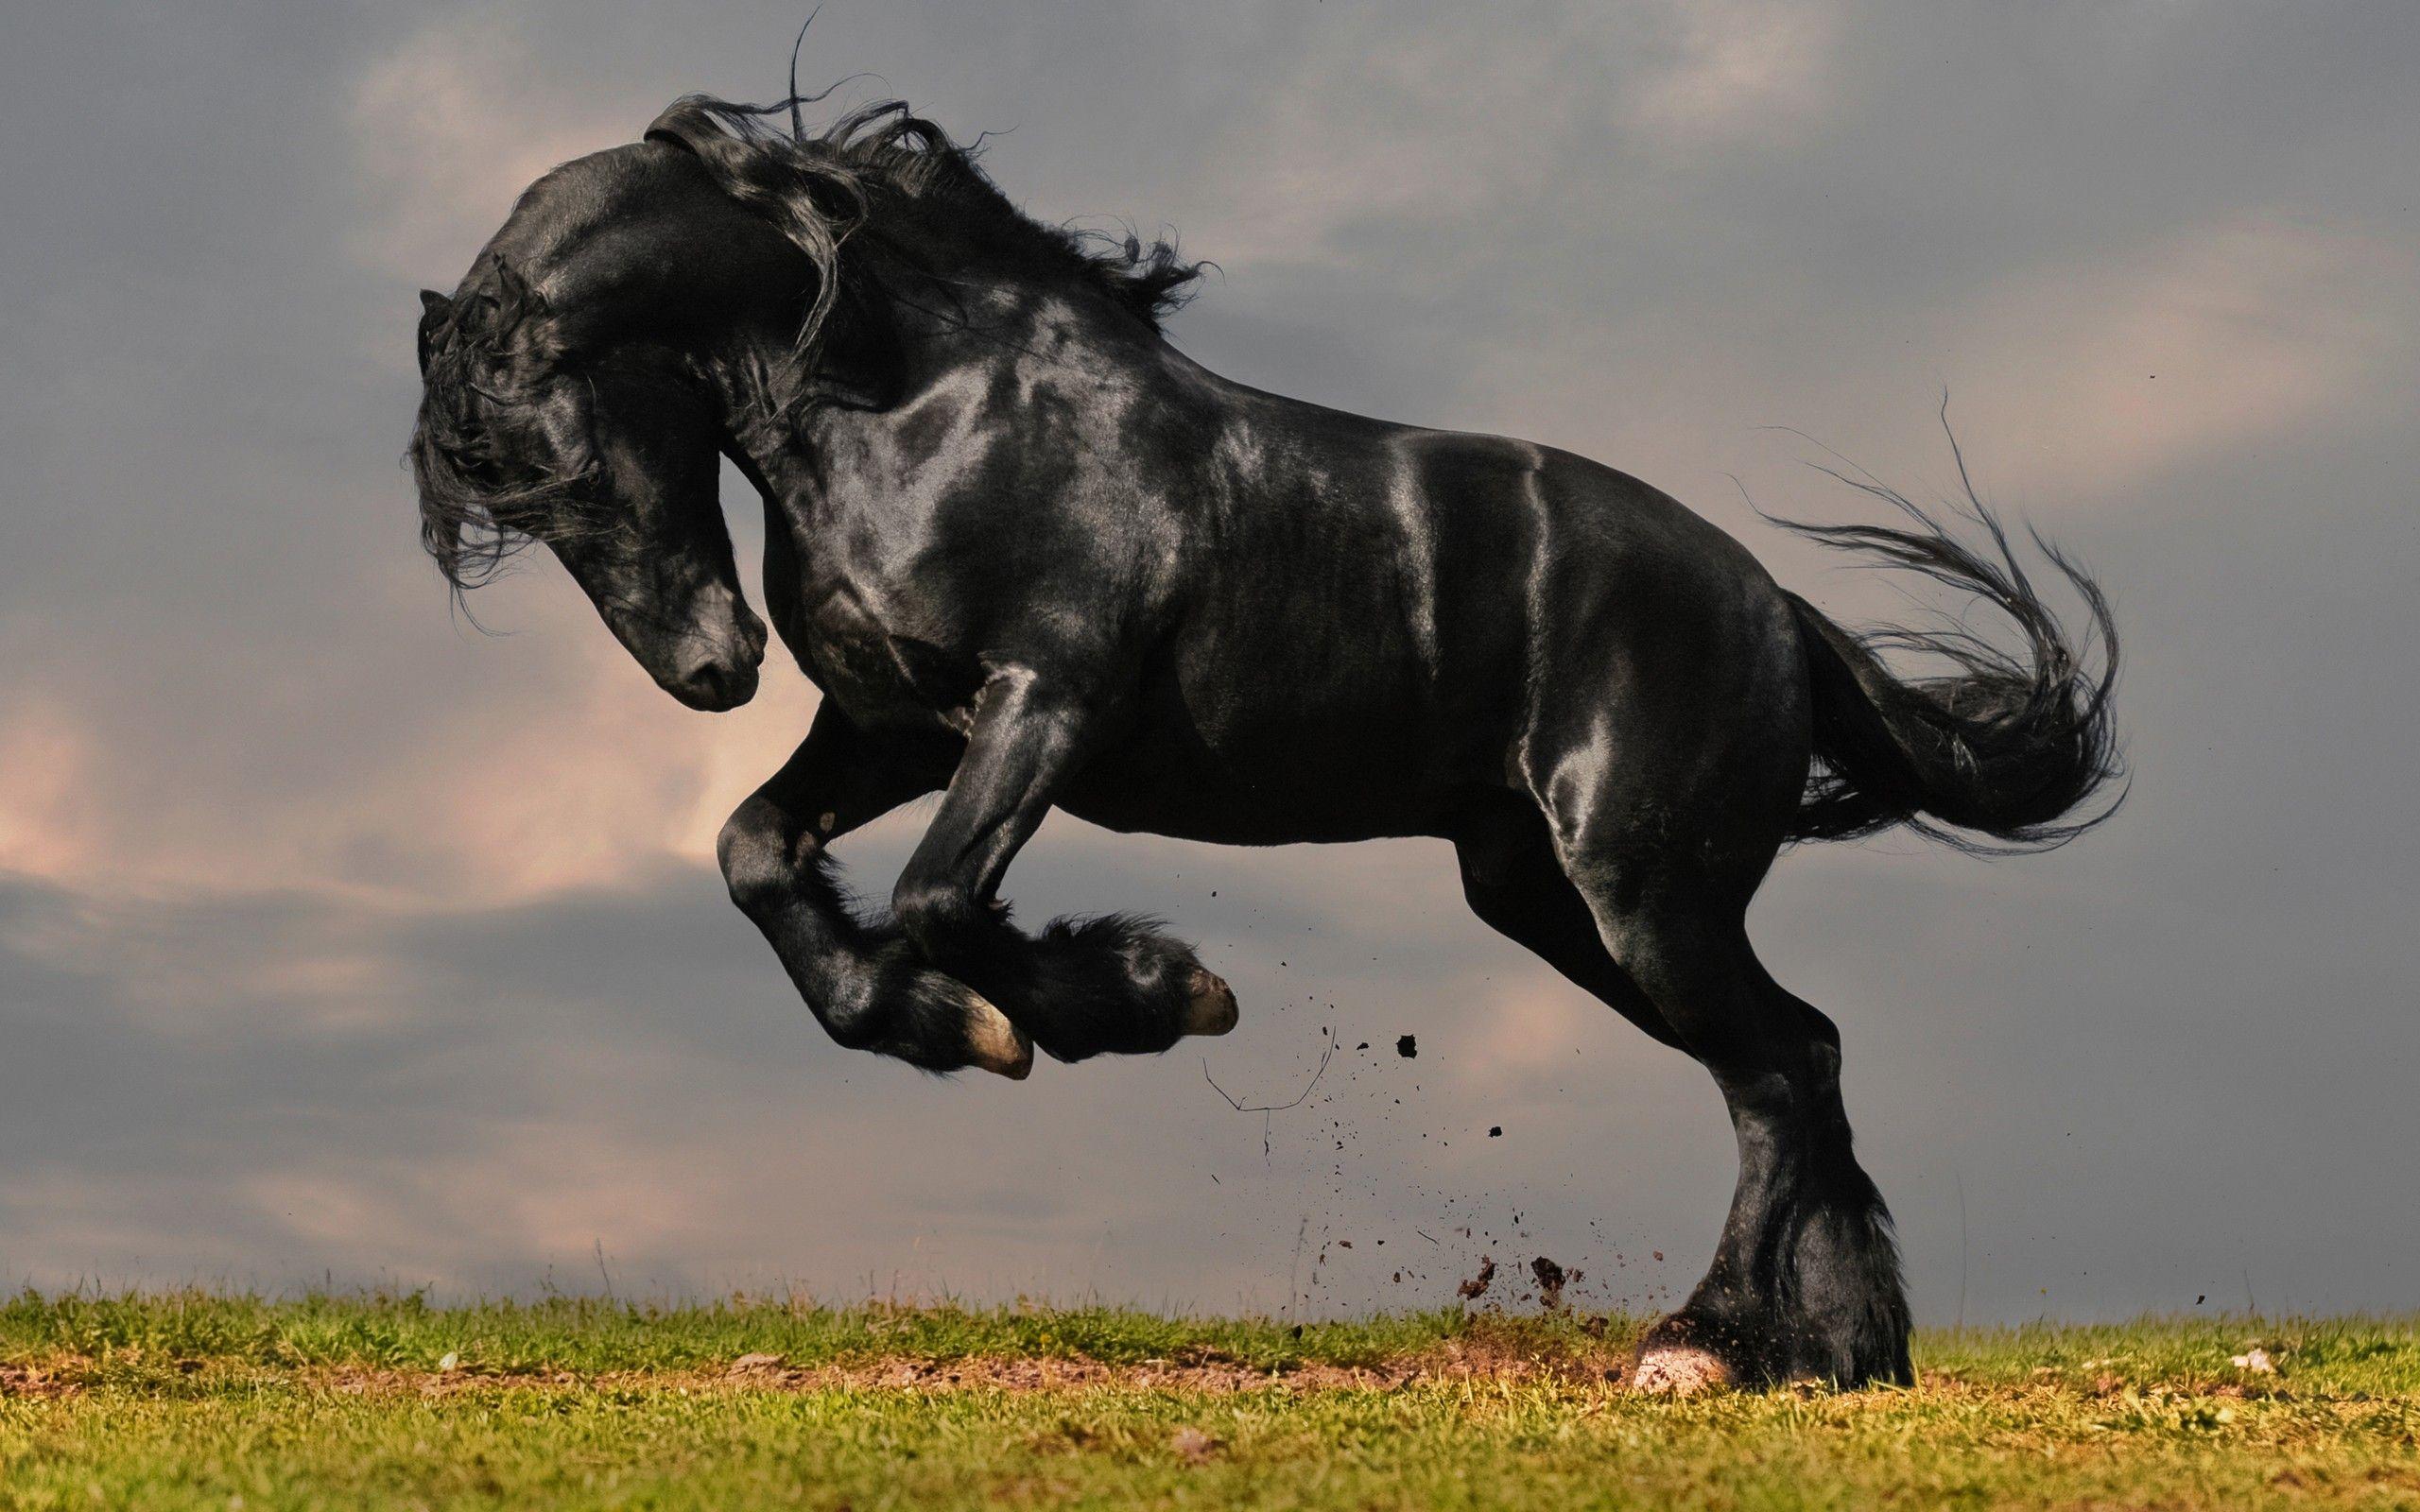 Horse: Mustang Theme Black Horse Wallpaper For Phone HD 16:9 High